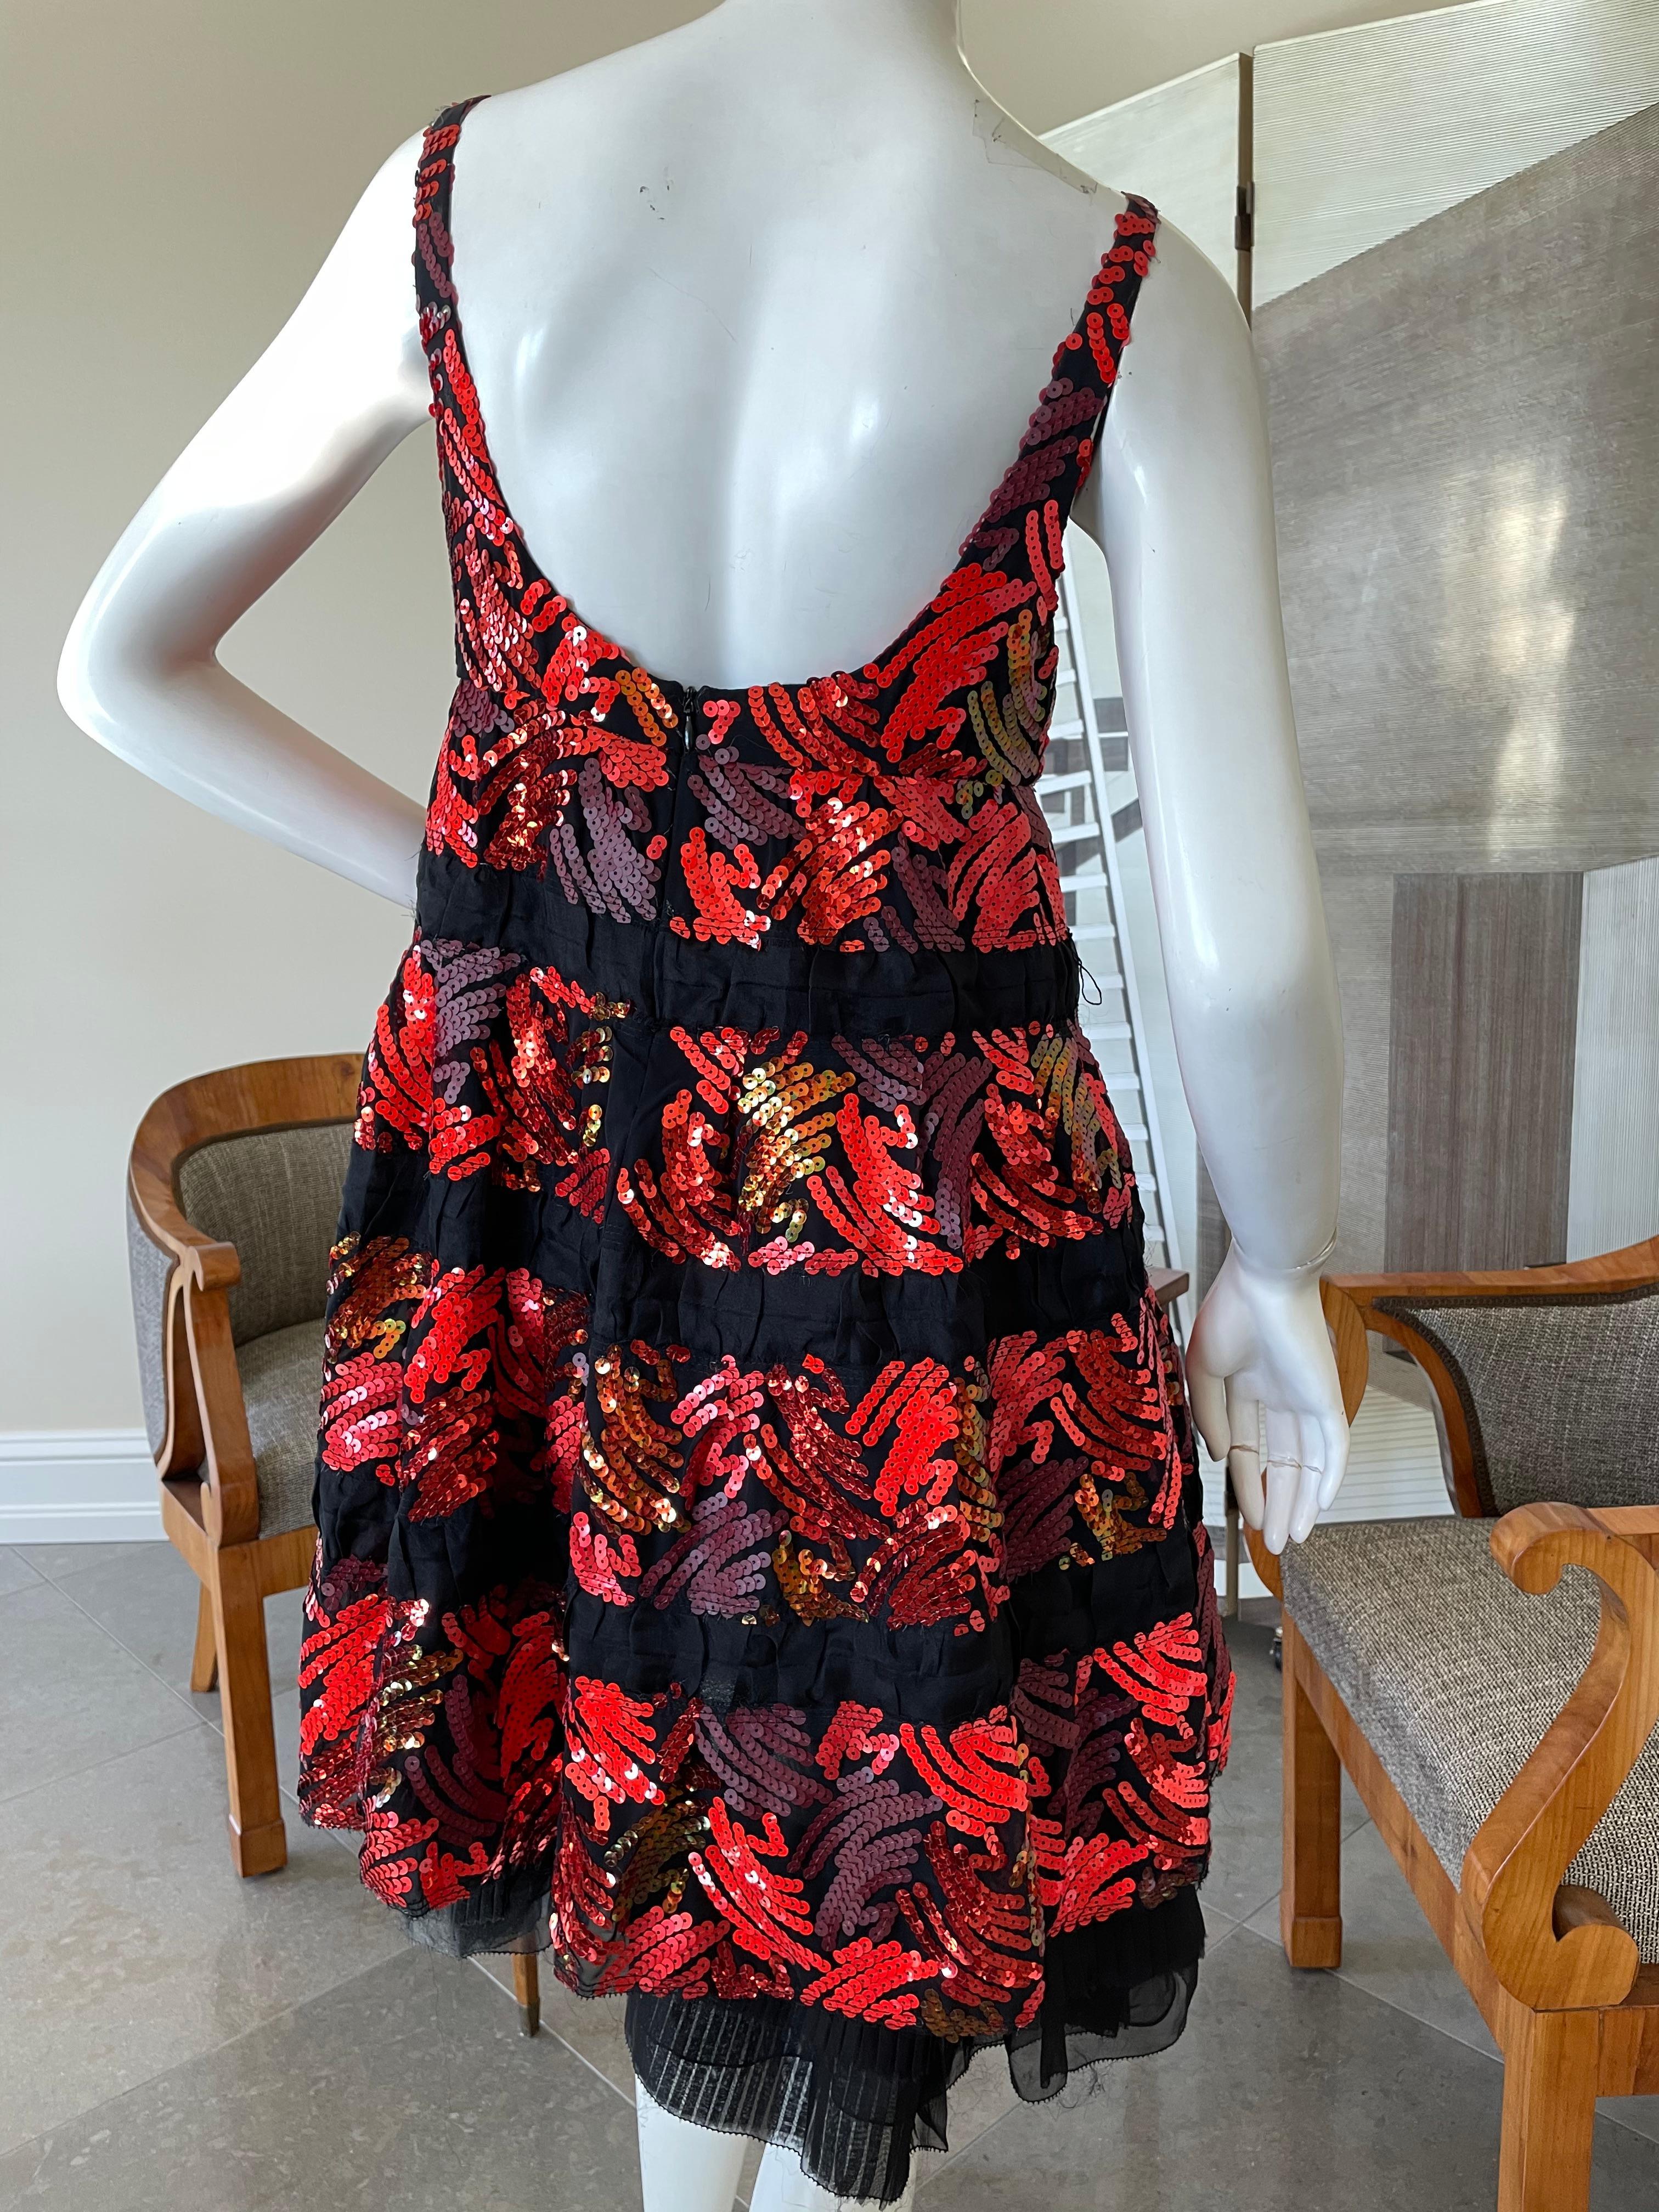 Marc Jacobs Collection Sequin Black Babydoll Dress In Excellent Condition For Sale In Cloverdale, CA